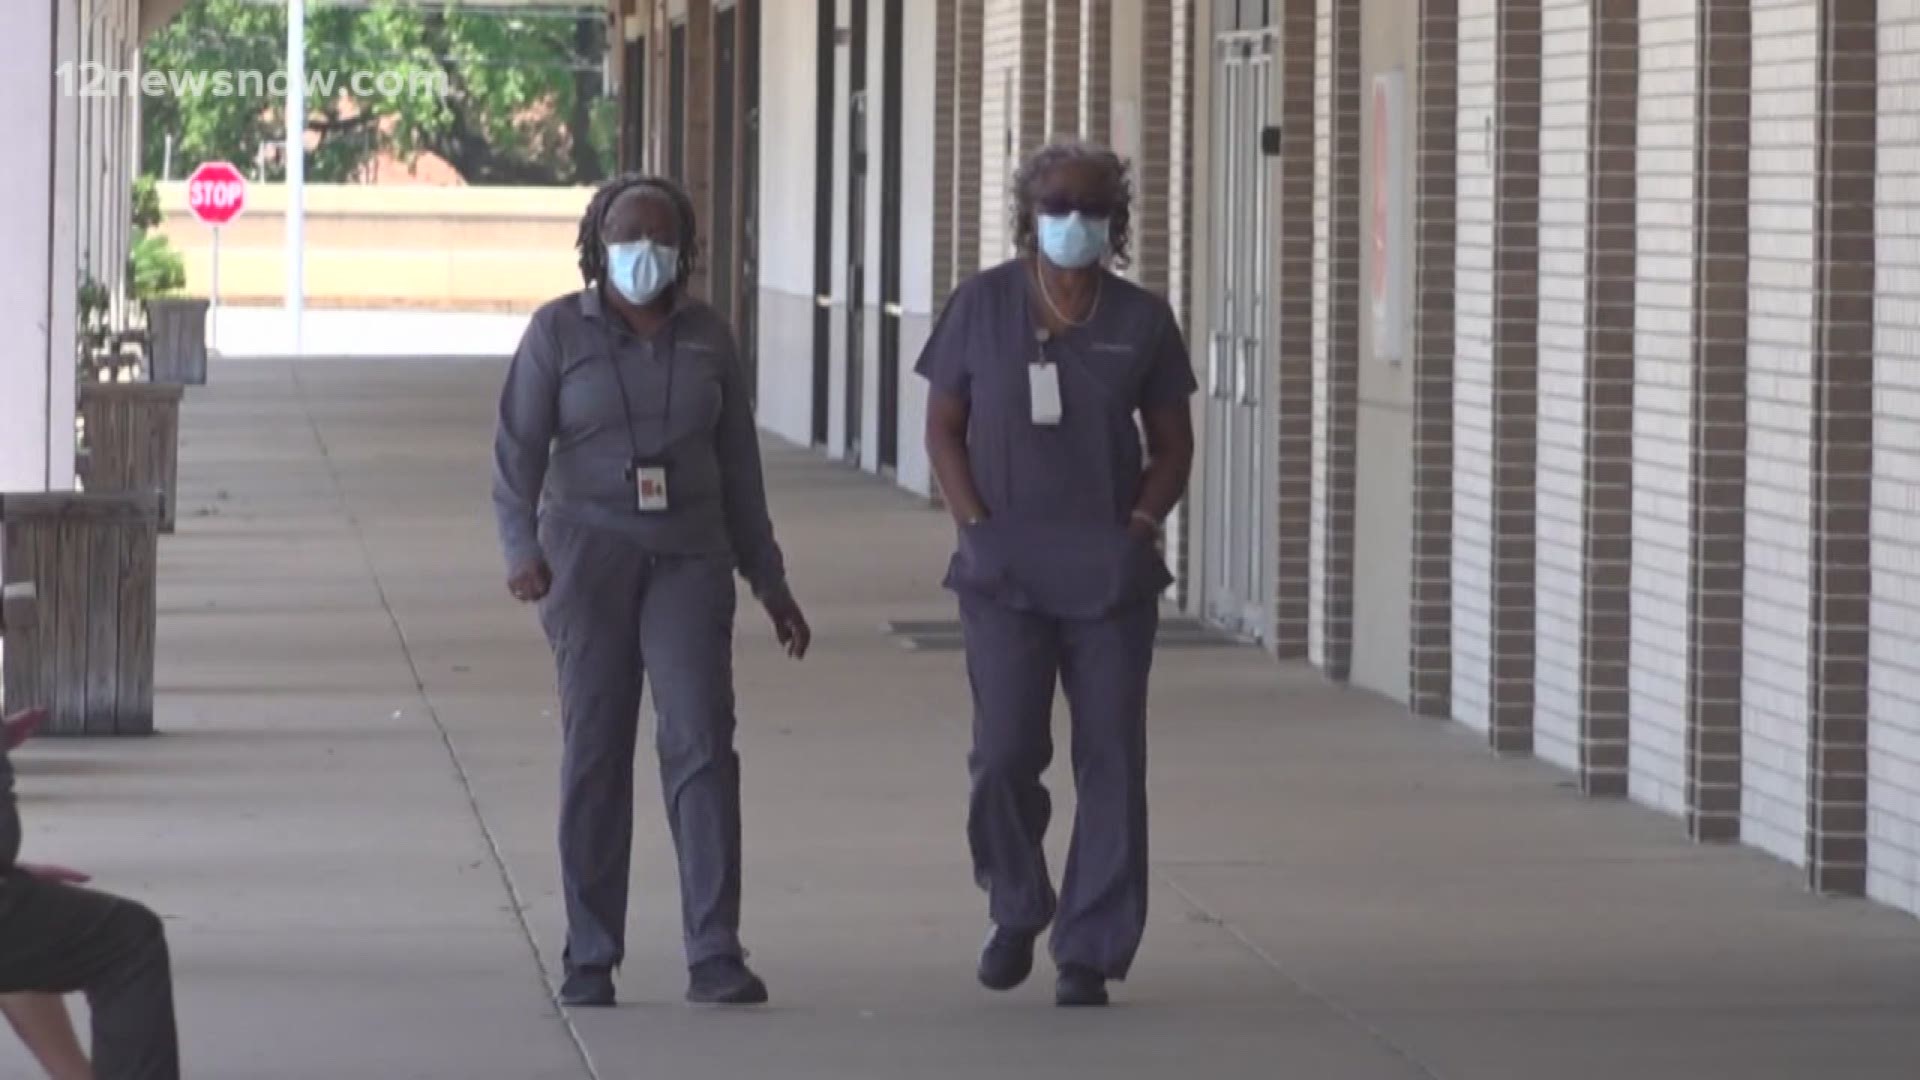 City mayors and the Hardin County judge had different opinions when it came to the regulating face masks in public.